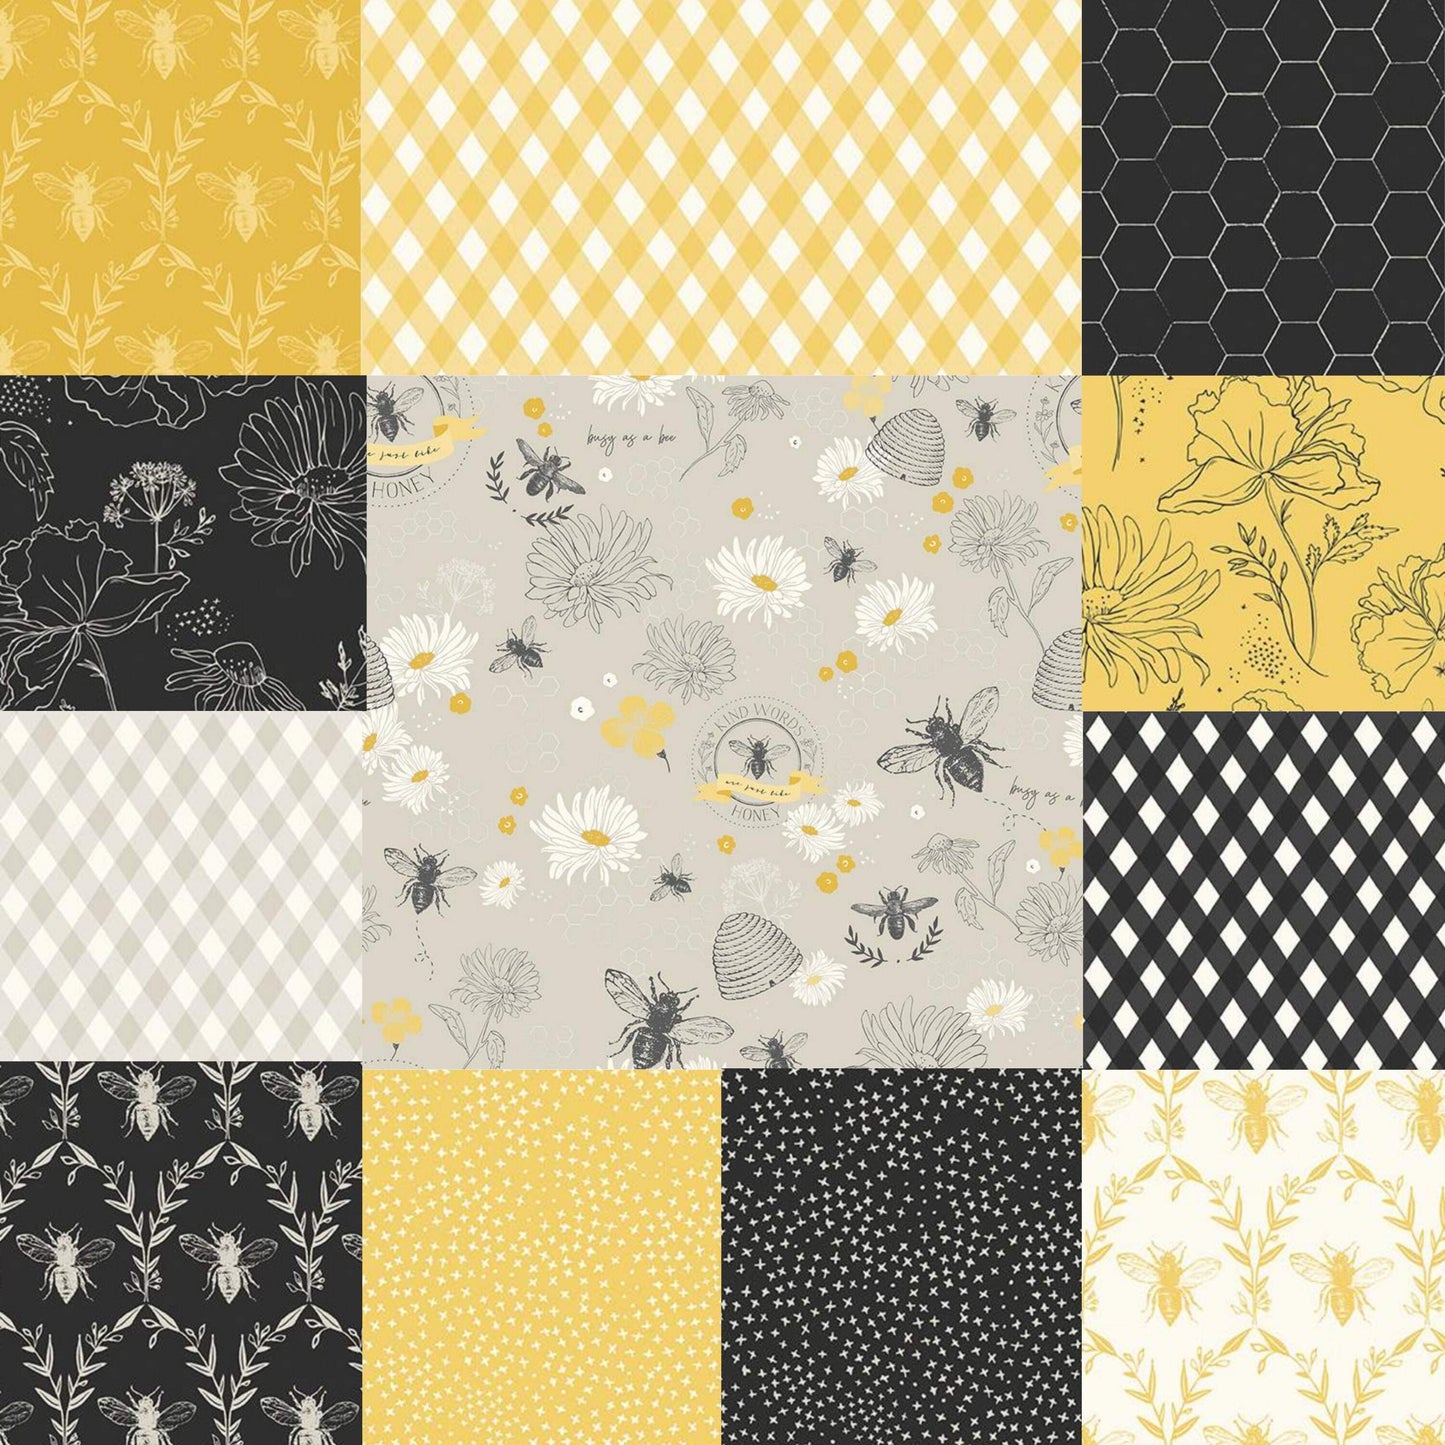 LAMINATED cotton fabric - Honey Bee Black (sold continuous by the half yard) Food Safe Fabric, BPA free